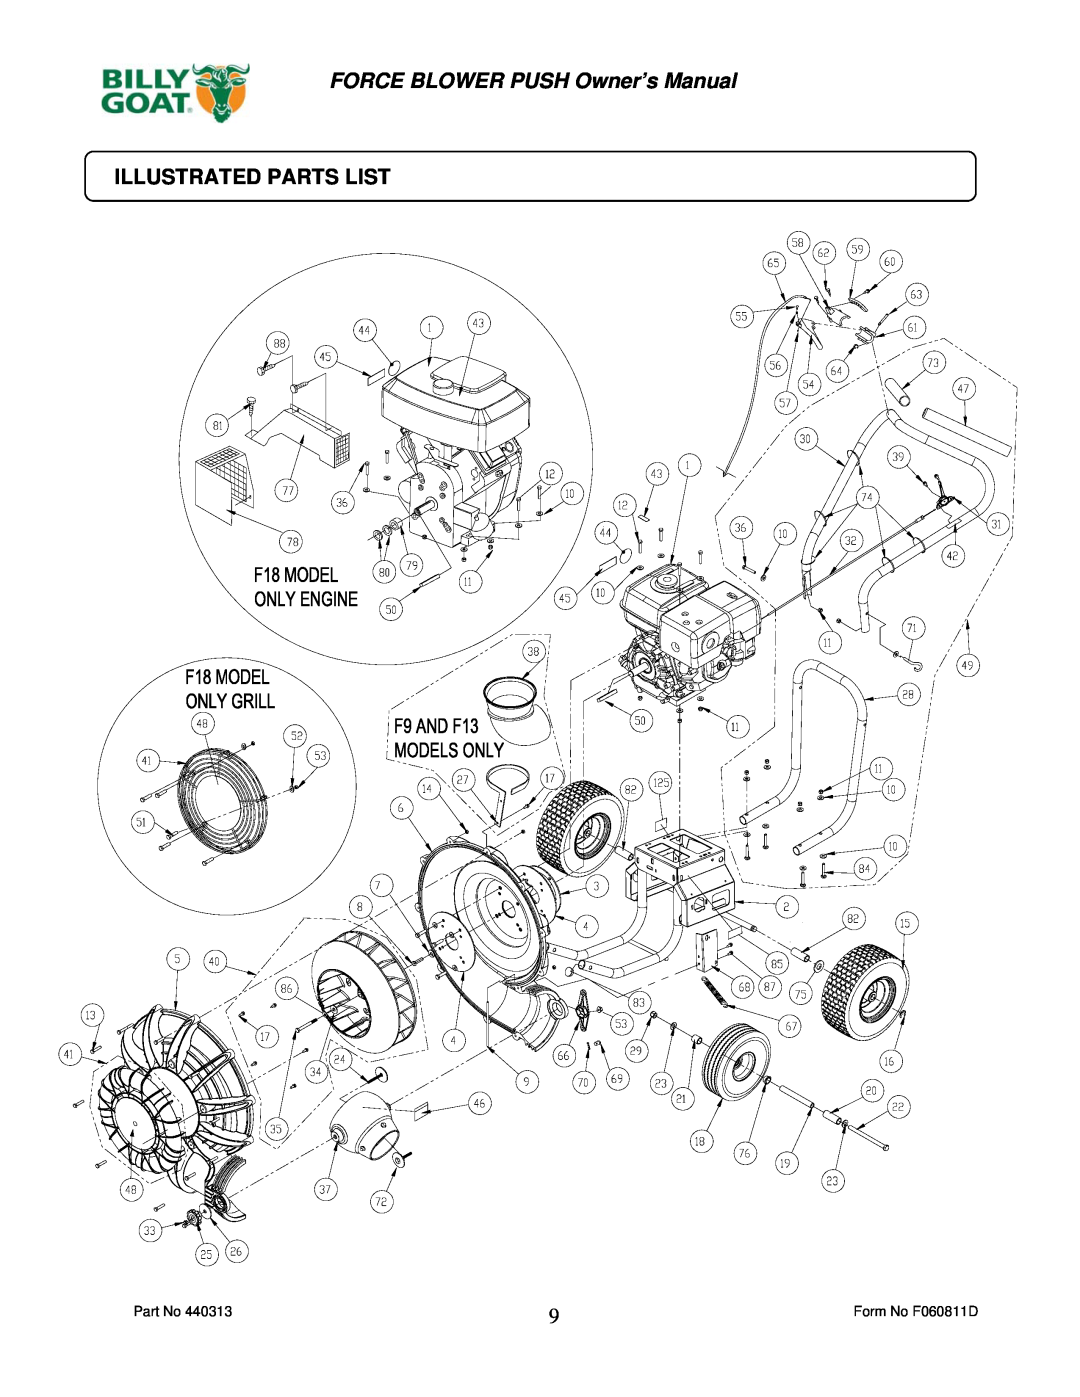 Billy Goat F1302H, F902S, F902H, F1802V owner manual Illustrated Parts List 